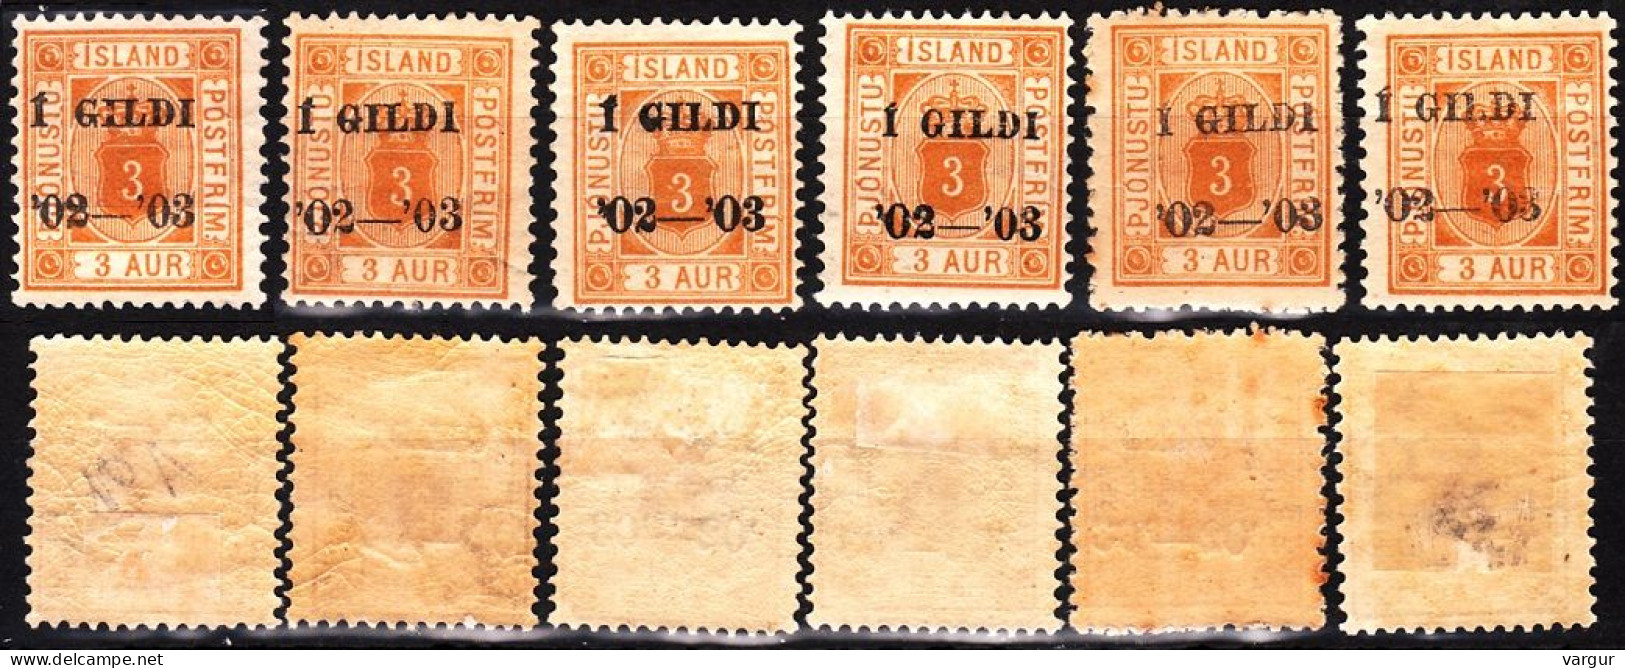 ICELAND / ISLAND Postage Due 1902 Overprints On 3A, Perf 12 3/4. 6 Copies, MH - Servizio